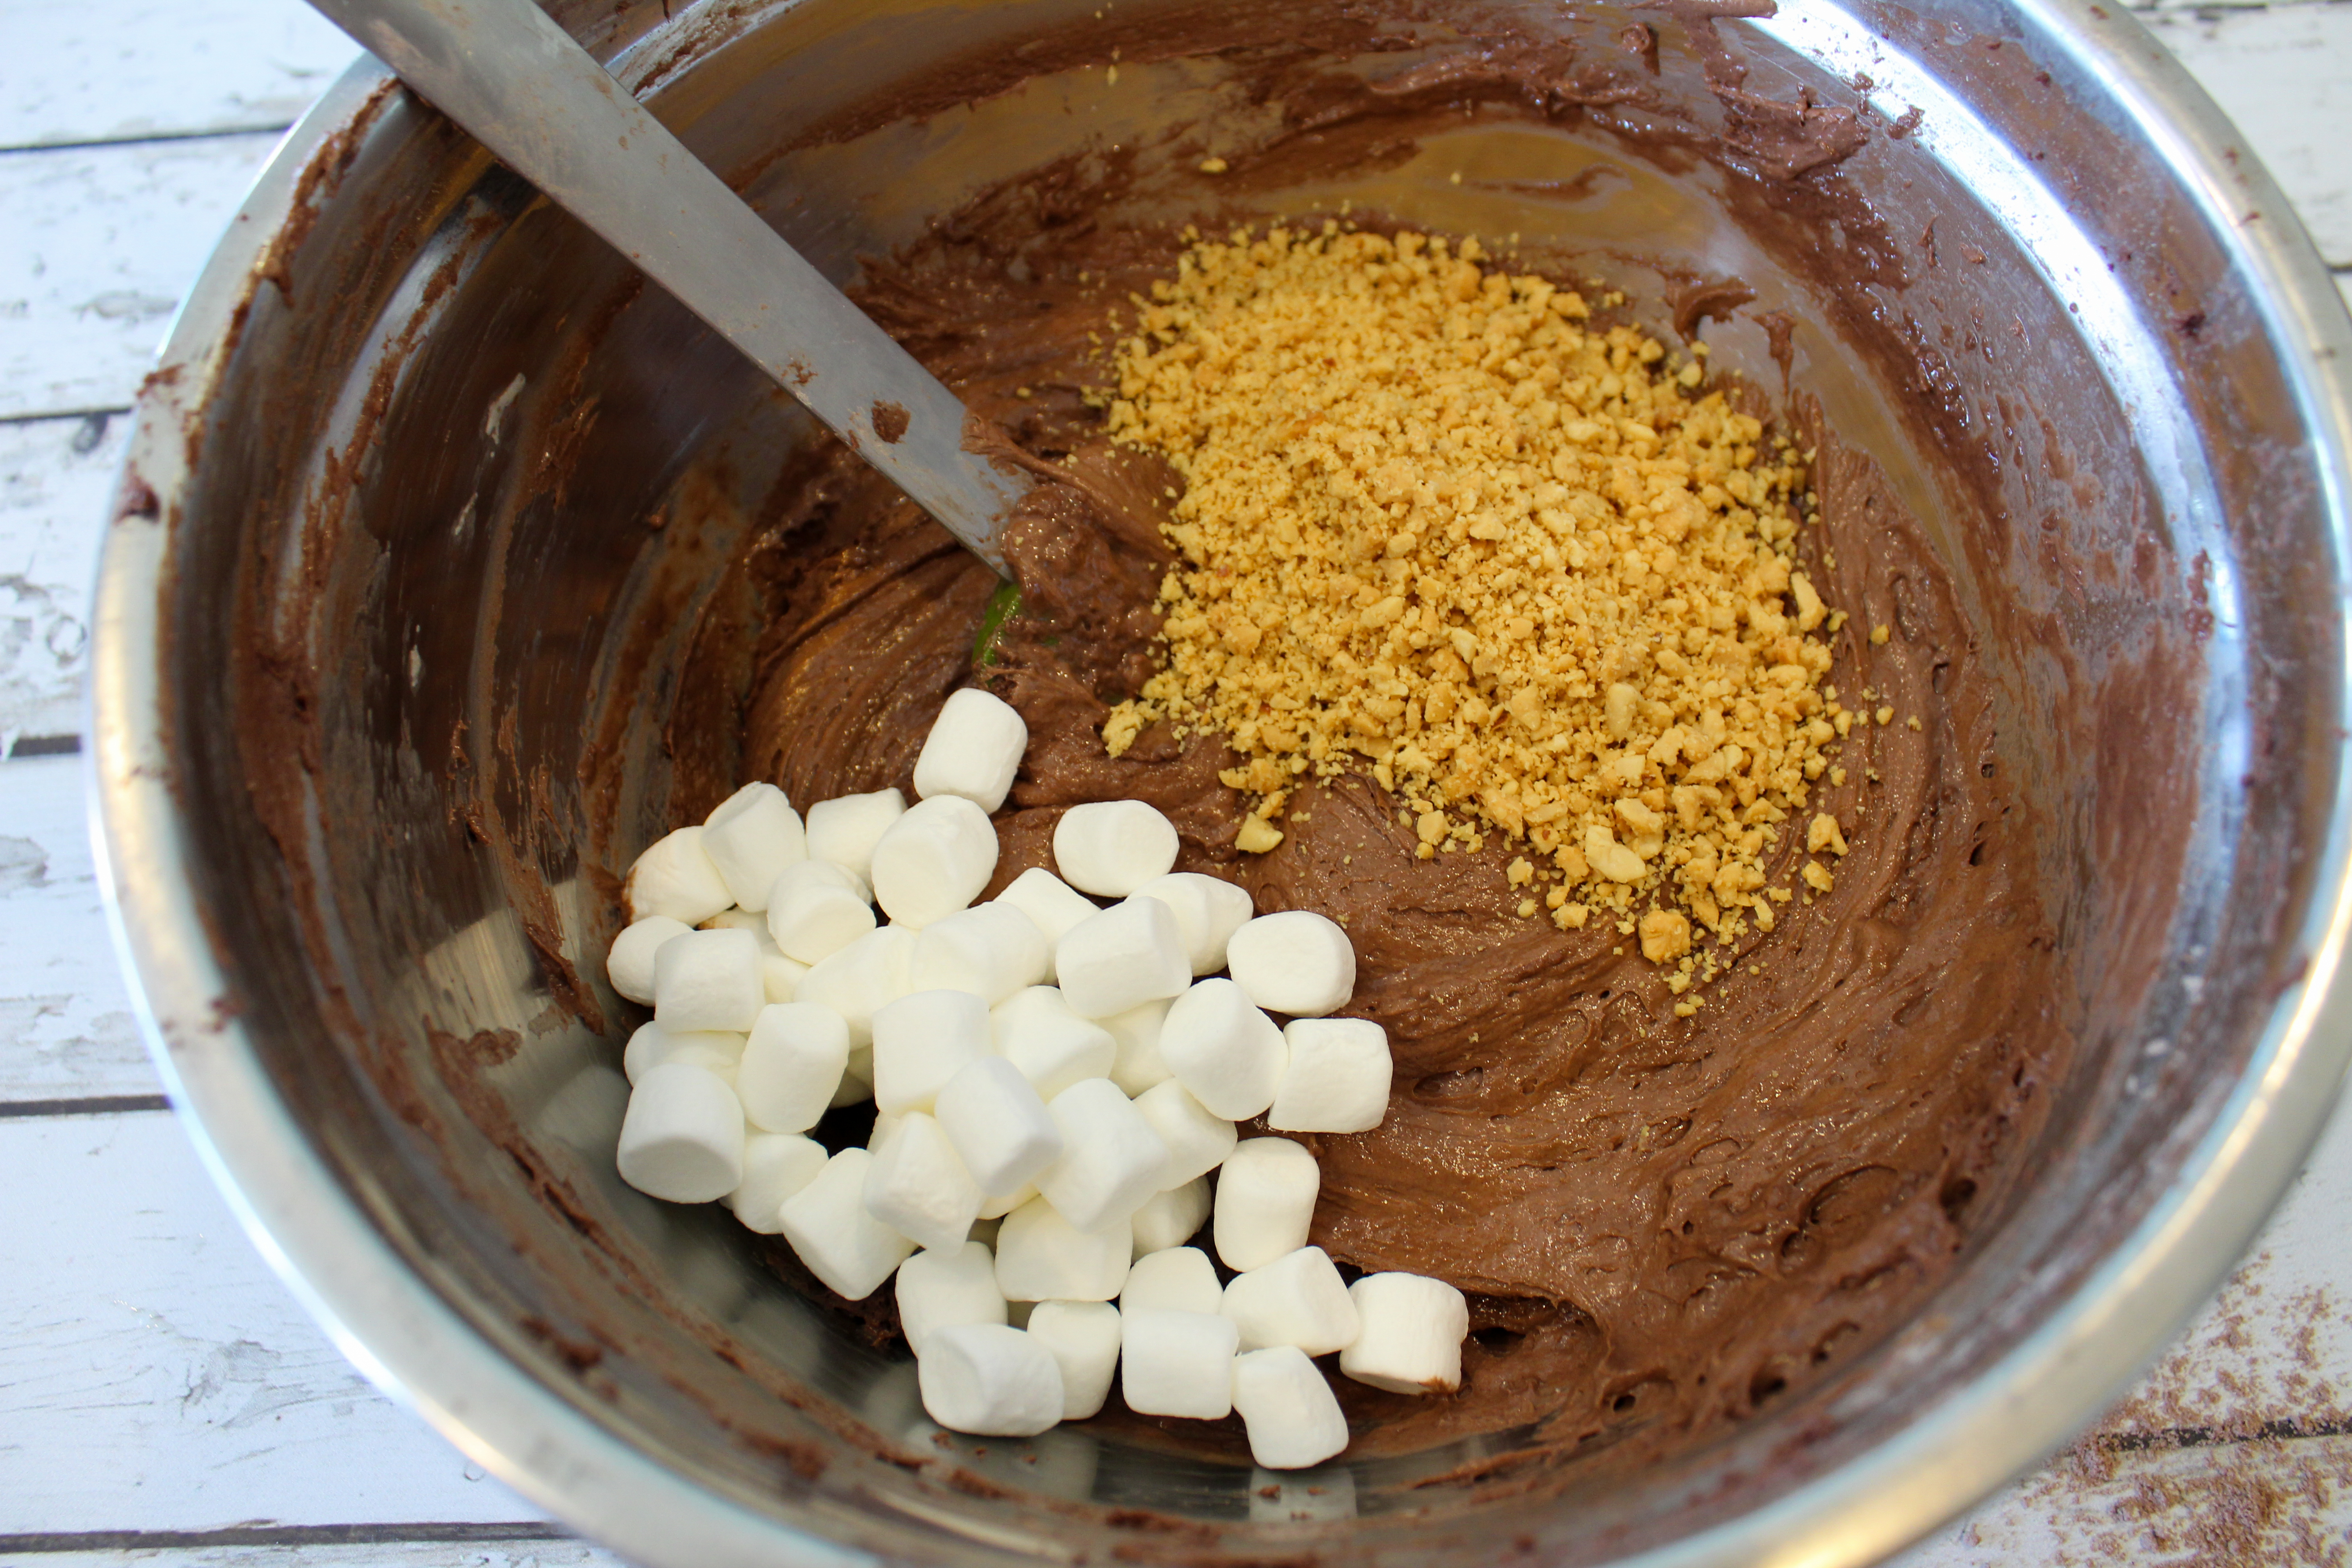 peanuts and marshmallows into the chocolate cupcake batter